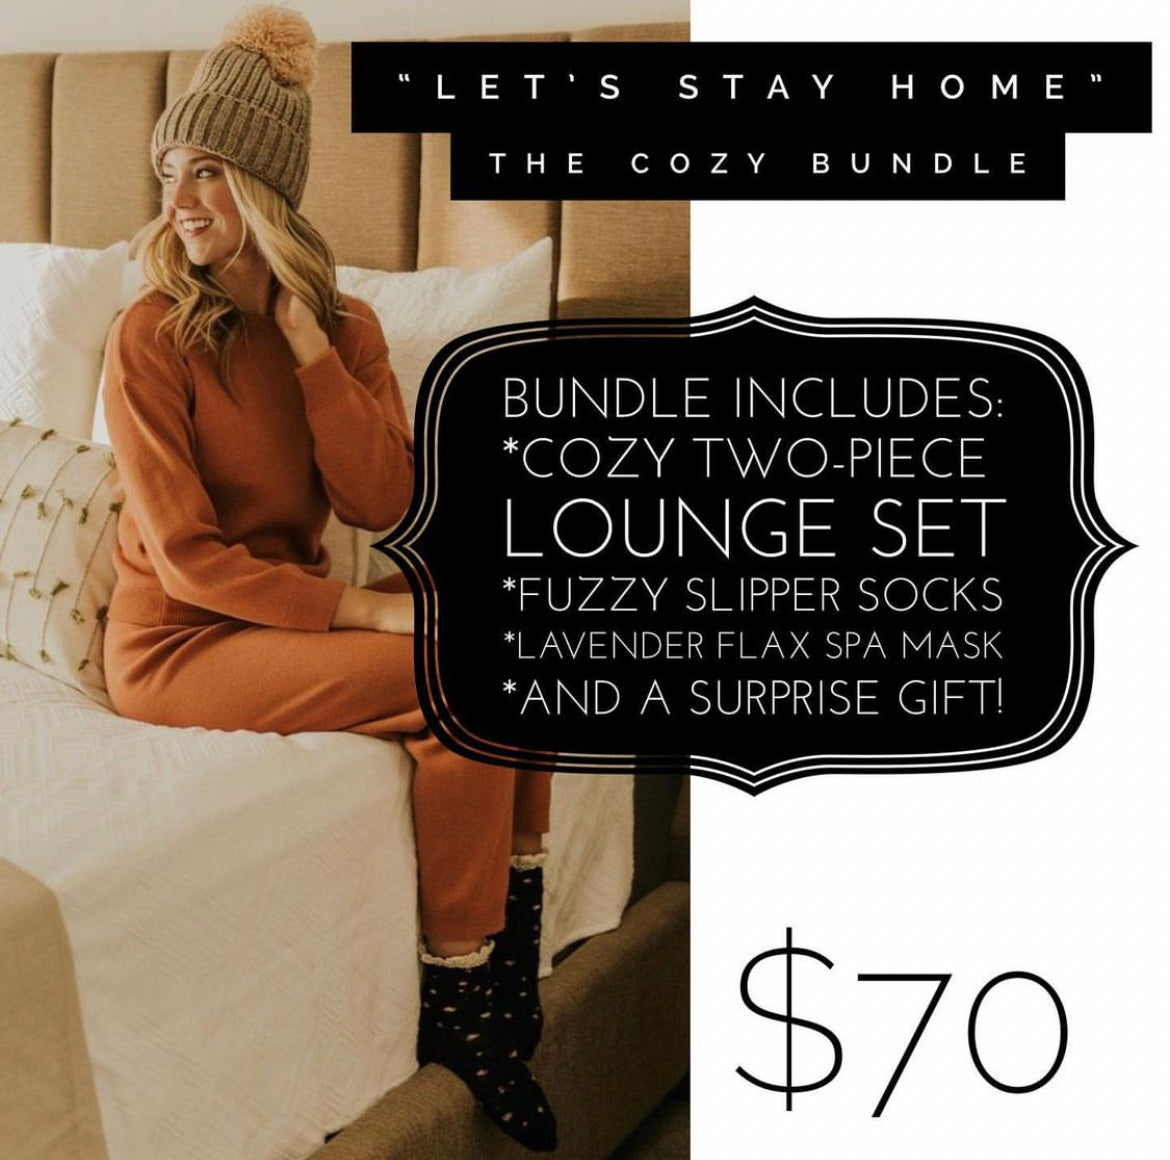 The Cozy Bundle Gift Package